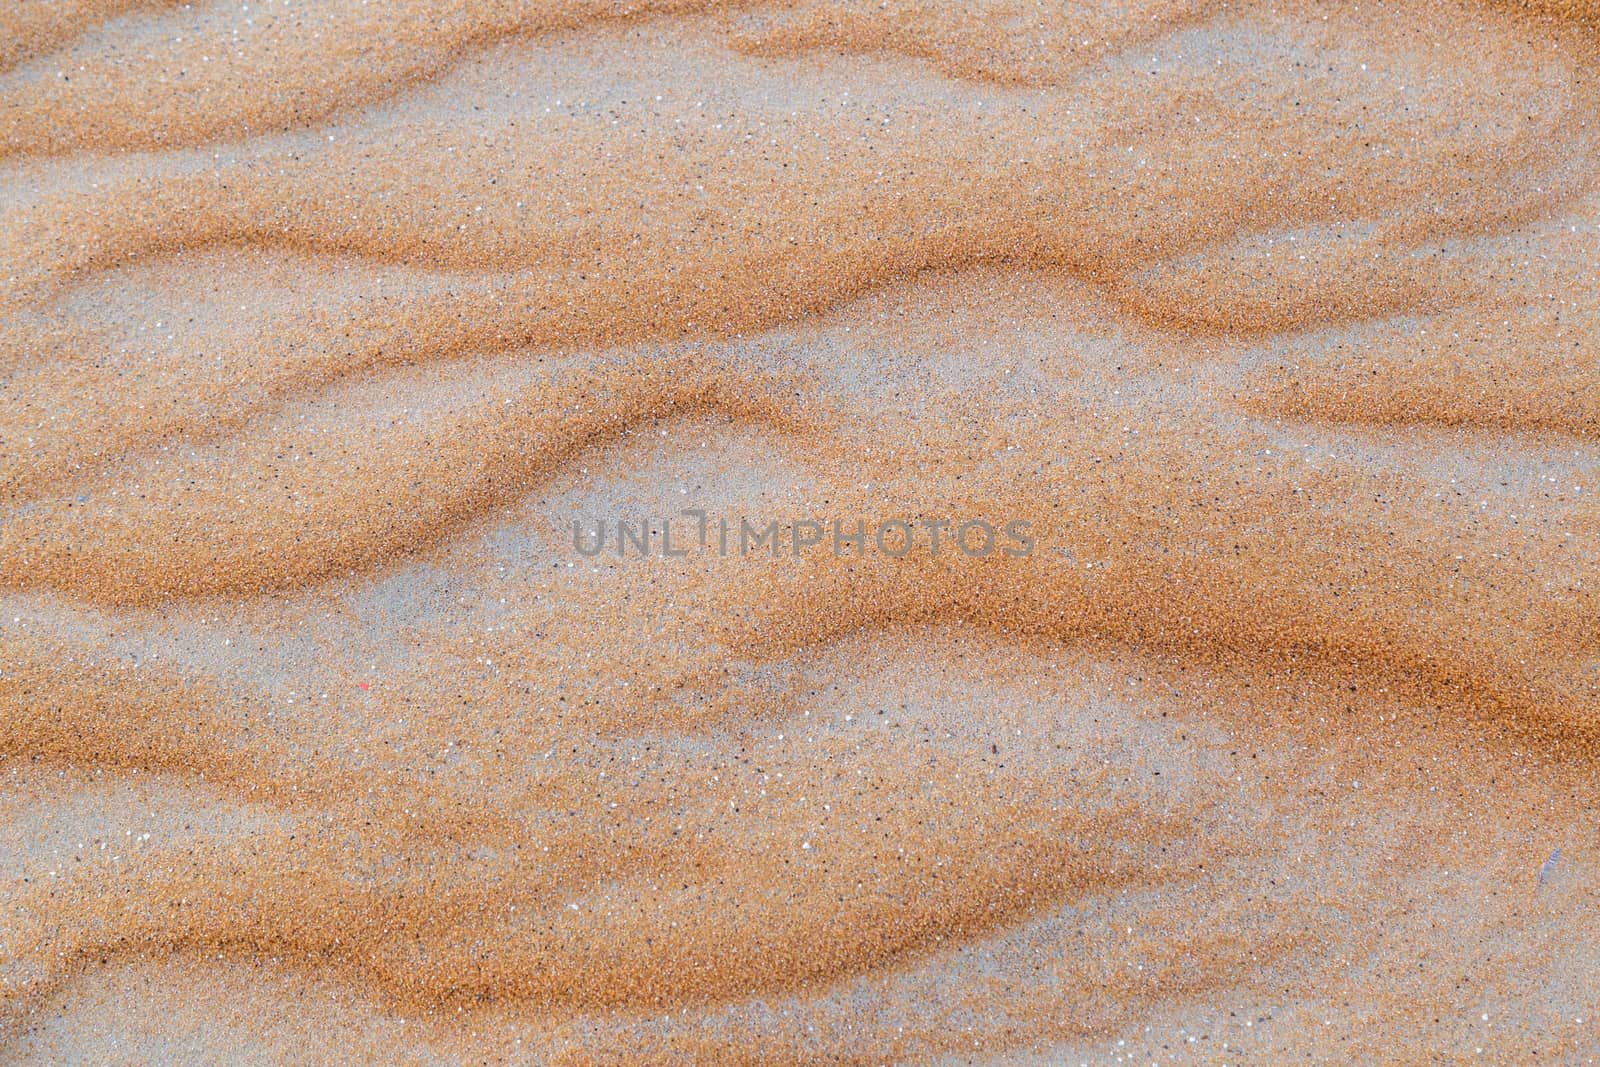 Close up of wave sand dunes pattern. Desert sand background or texture.